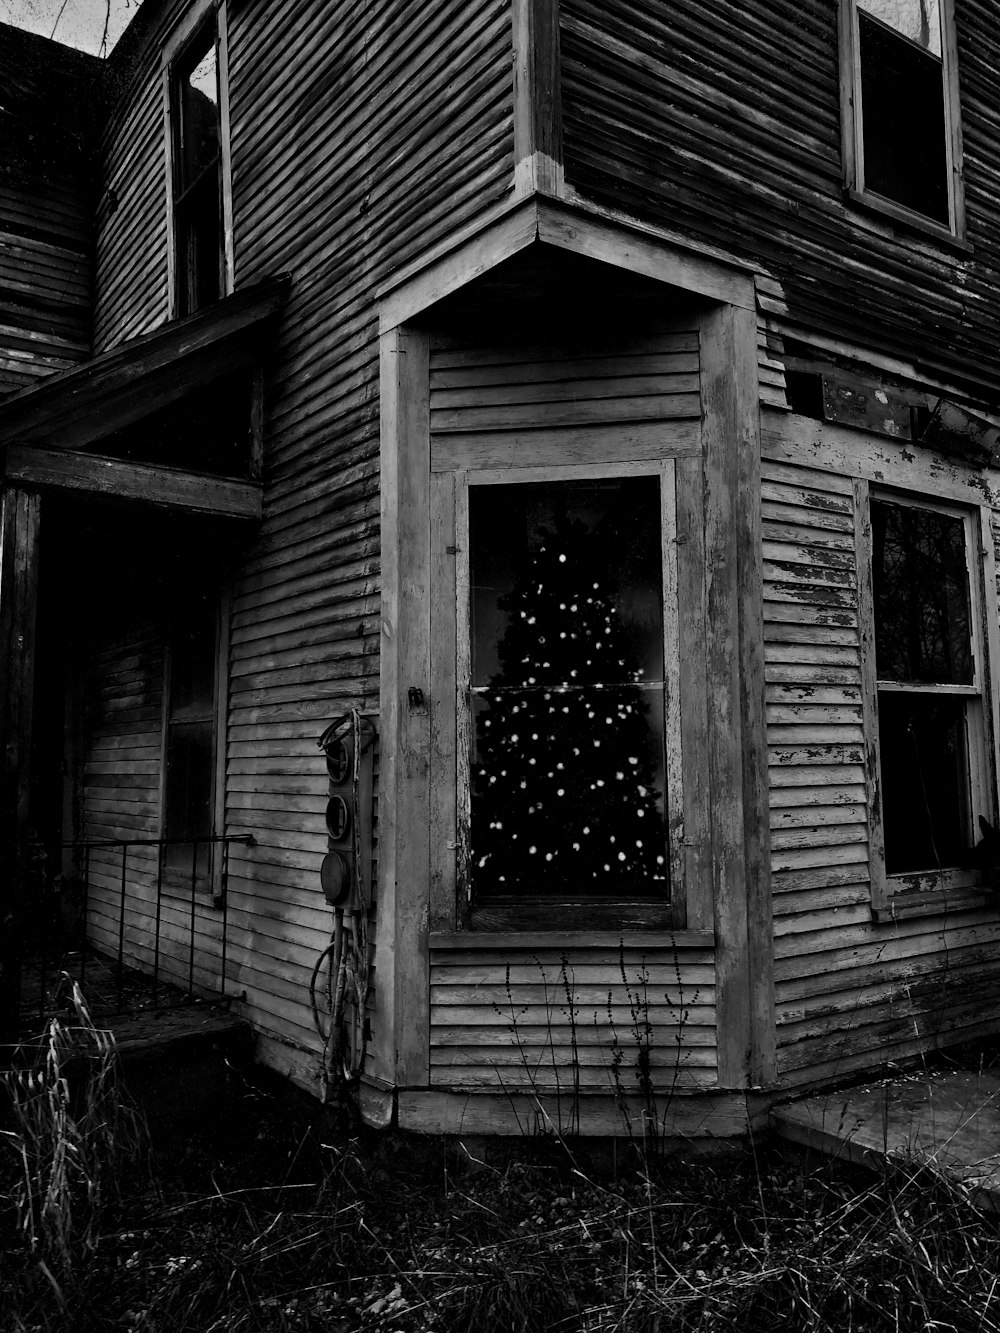 a black and white photo of a house with a christmas tree in the window